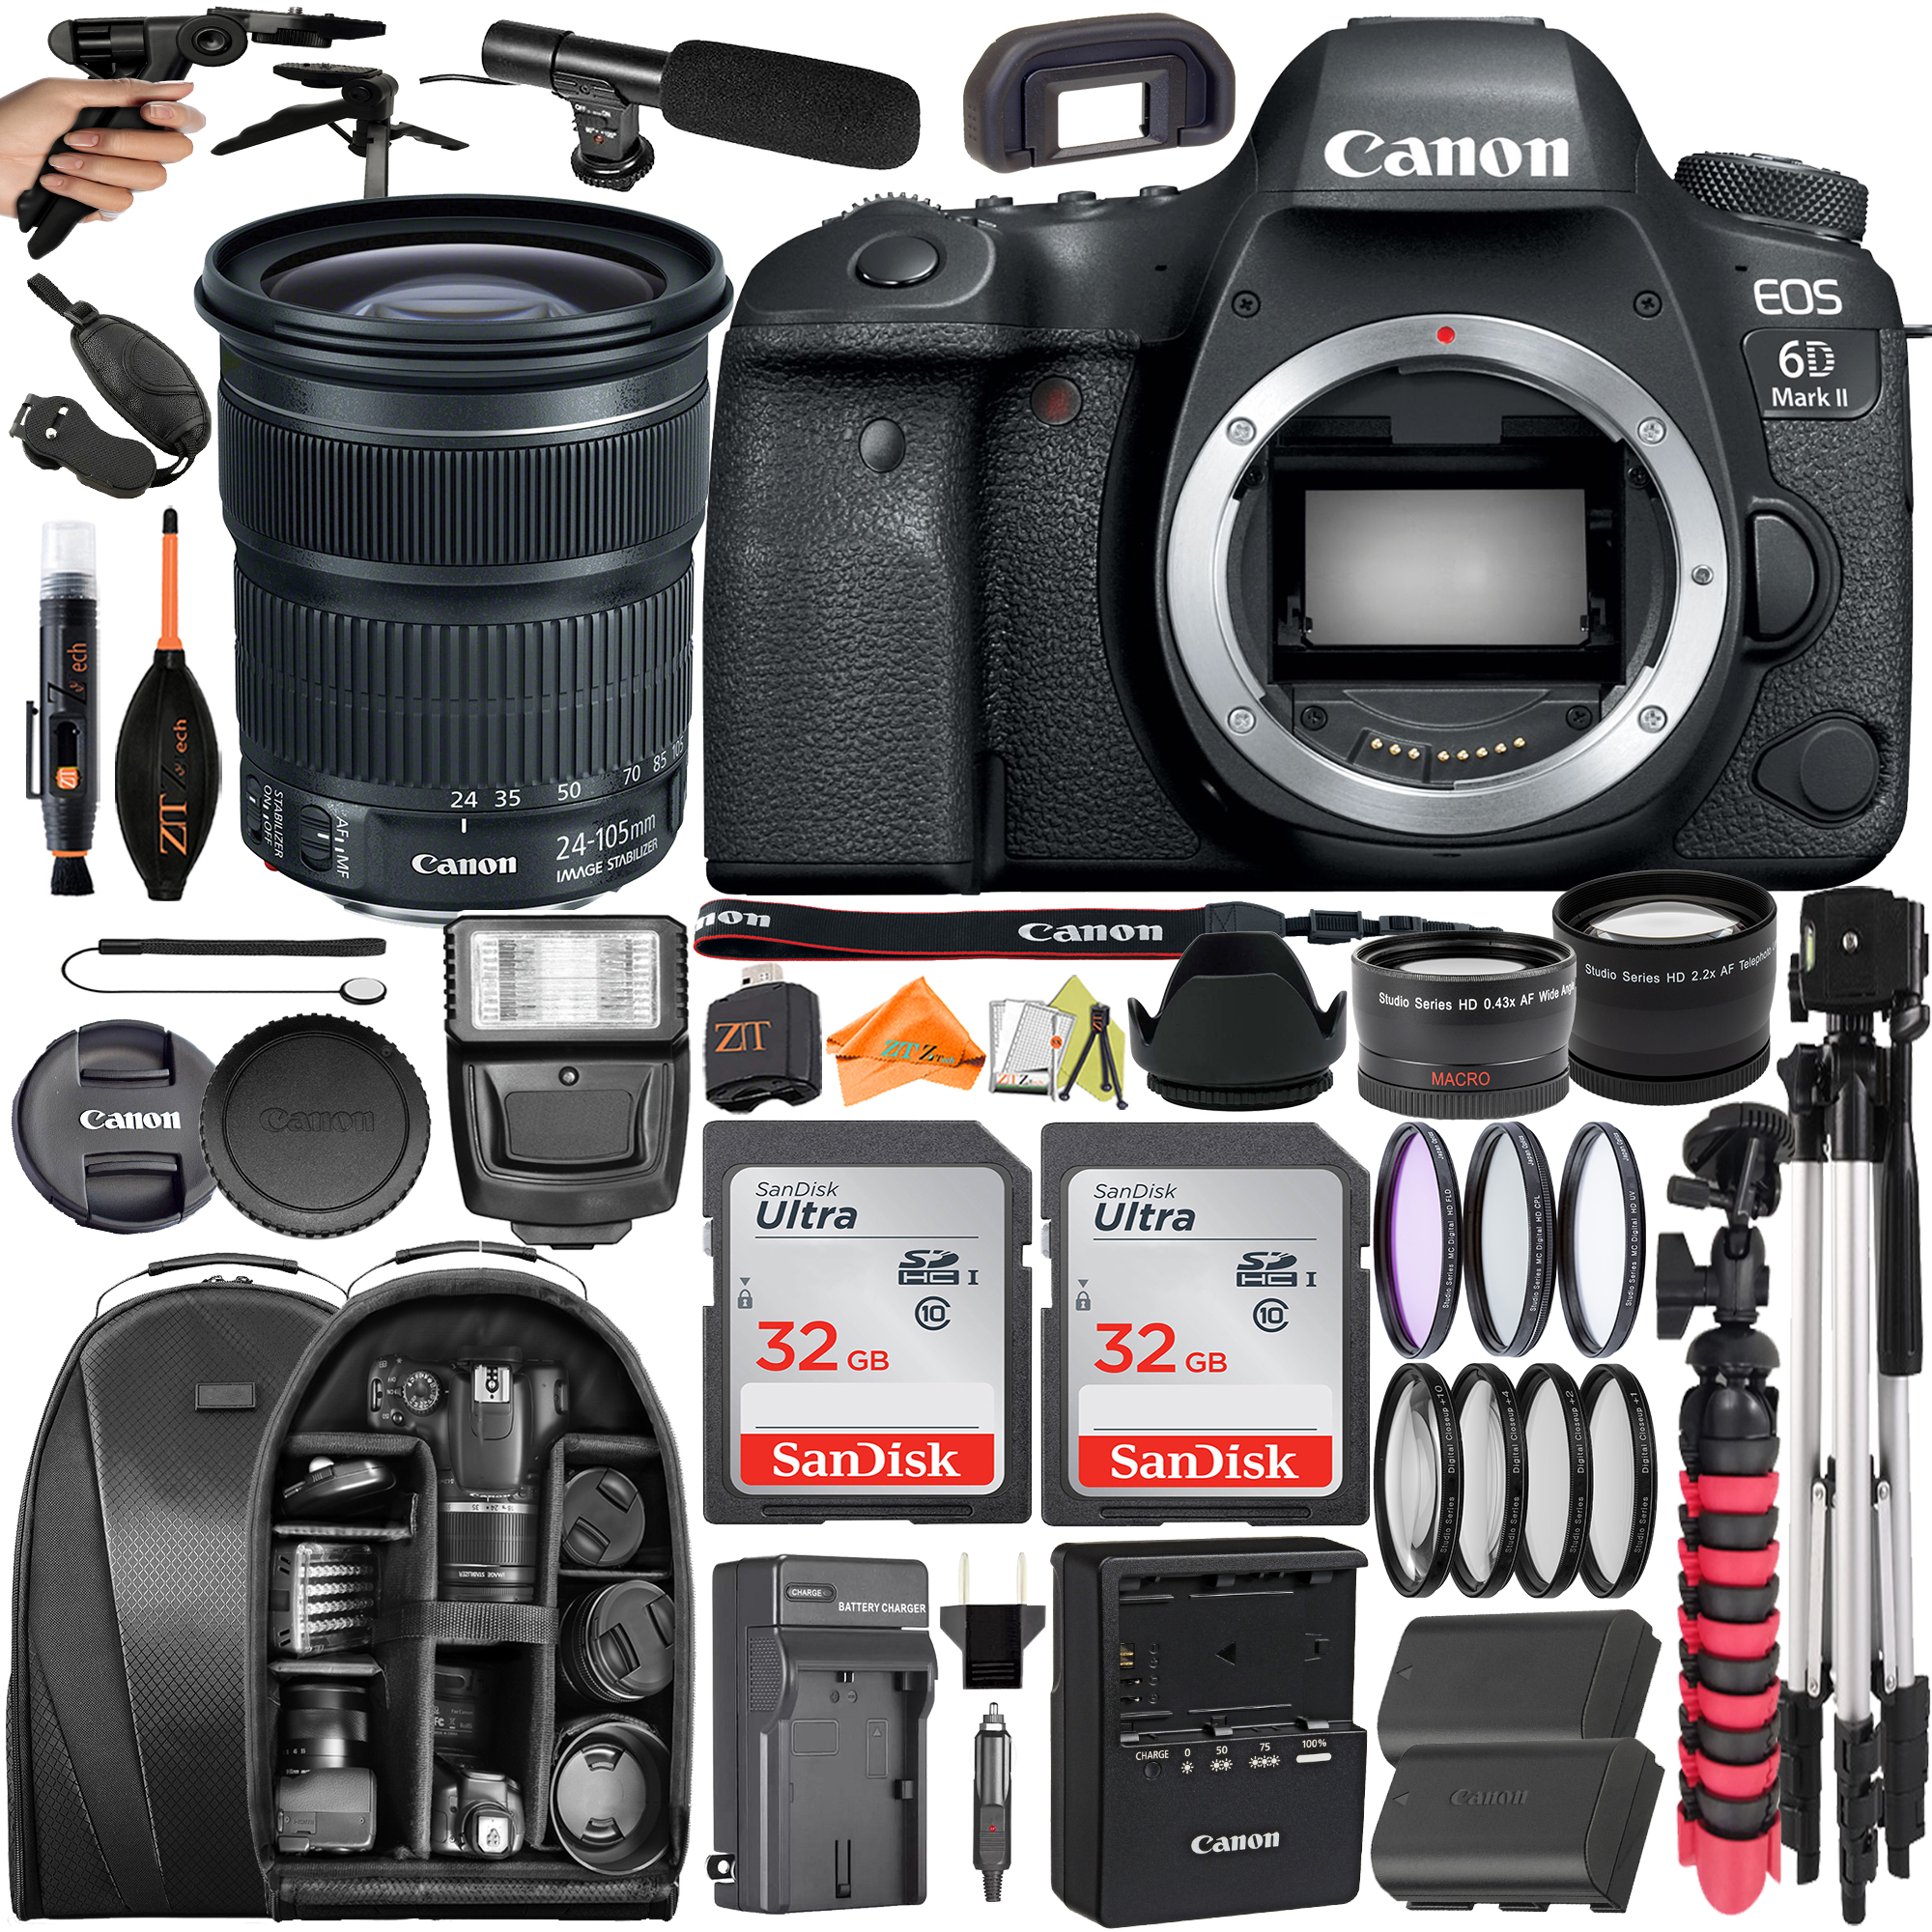 Canon EOS 6D Mark II DSLR Camera with 24-105mm Lens + SanDisk 32GB + Backpack Case + Telephoto + ZeeTech Accessory Bundle